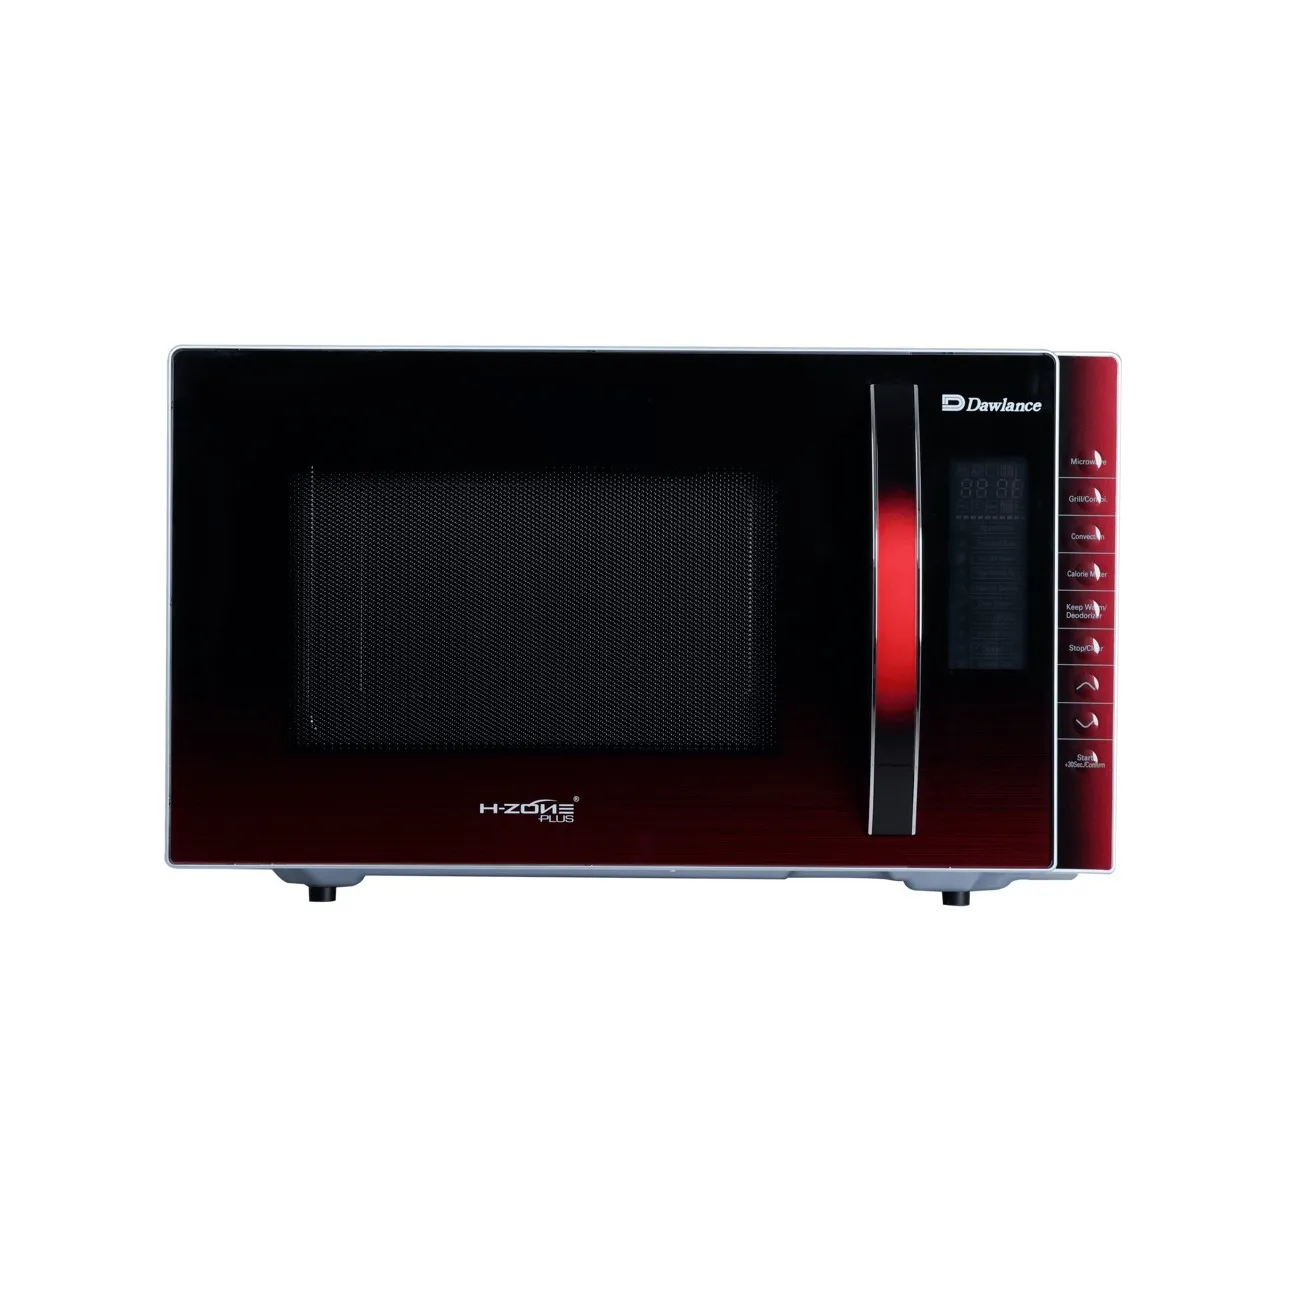 DW 115 CHZP Baking Microwave Oven